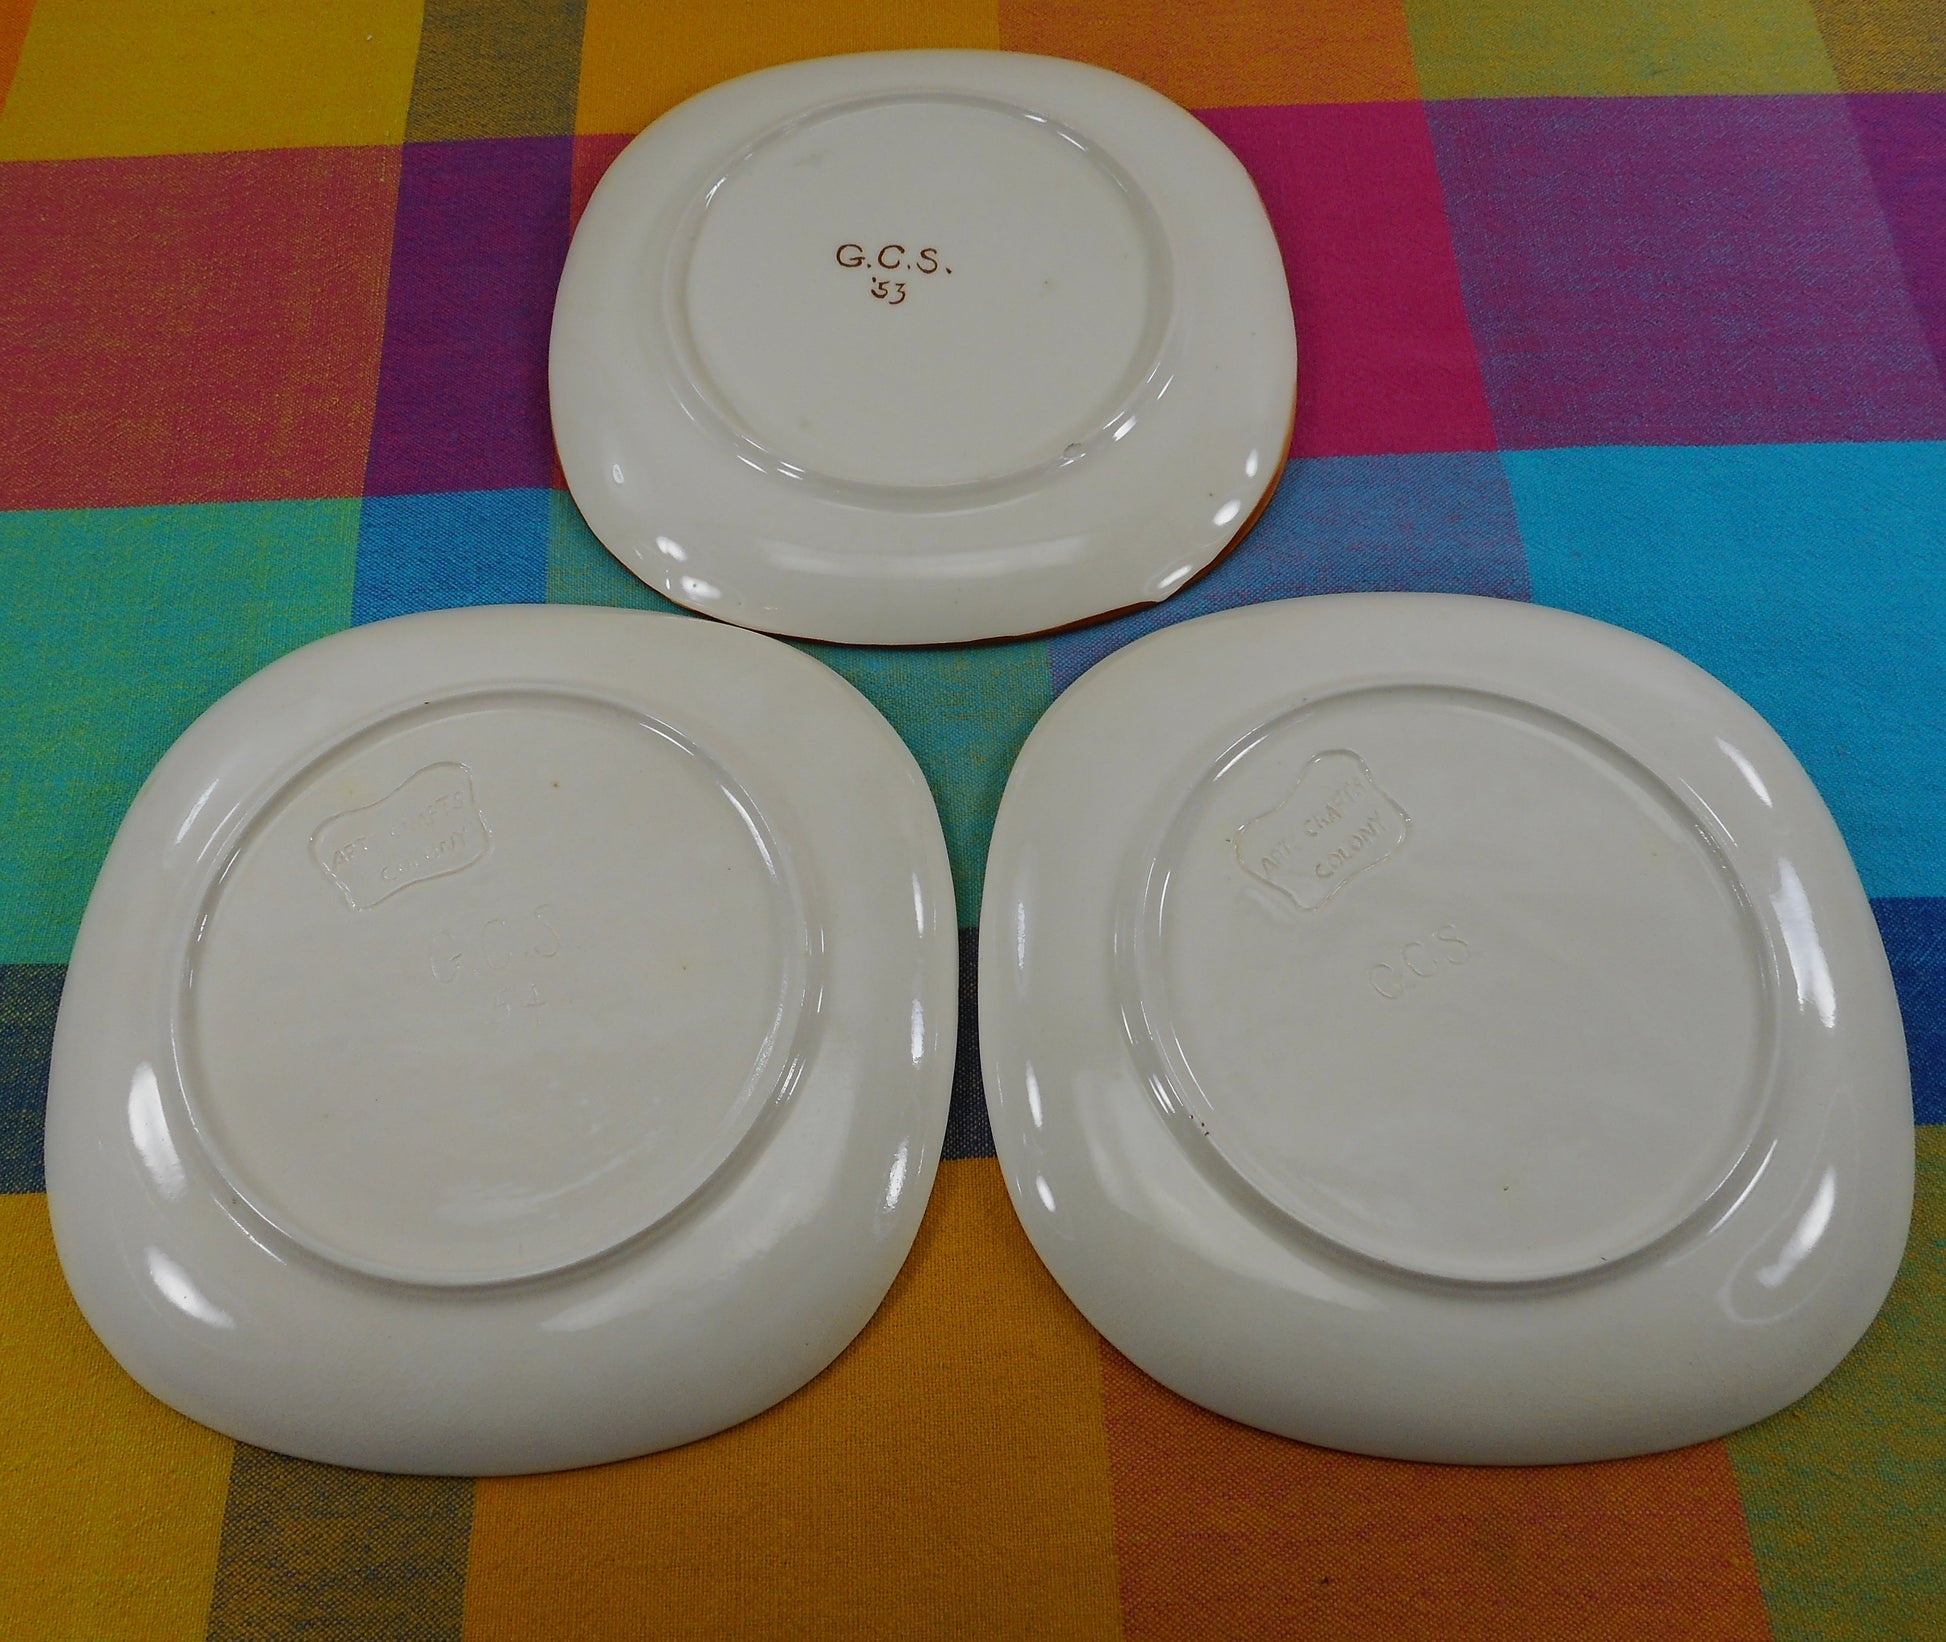 Arts Crafts Colony Signed Initials G.C.S. 1950s Square Plates Brown White Pottery